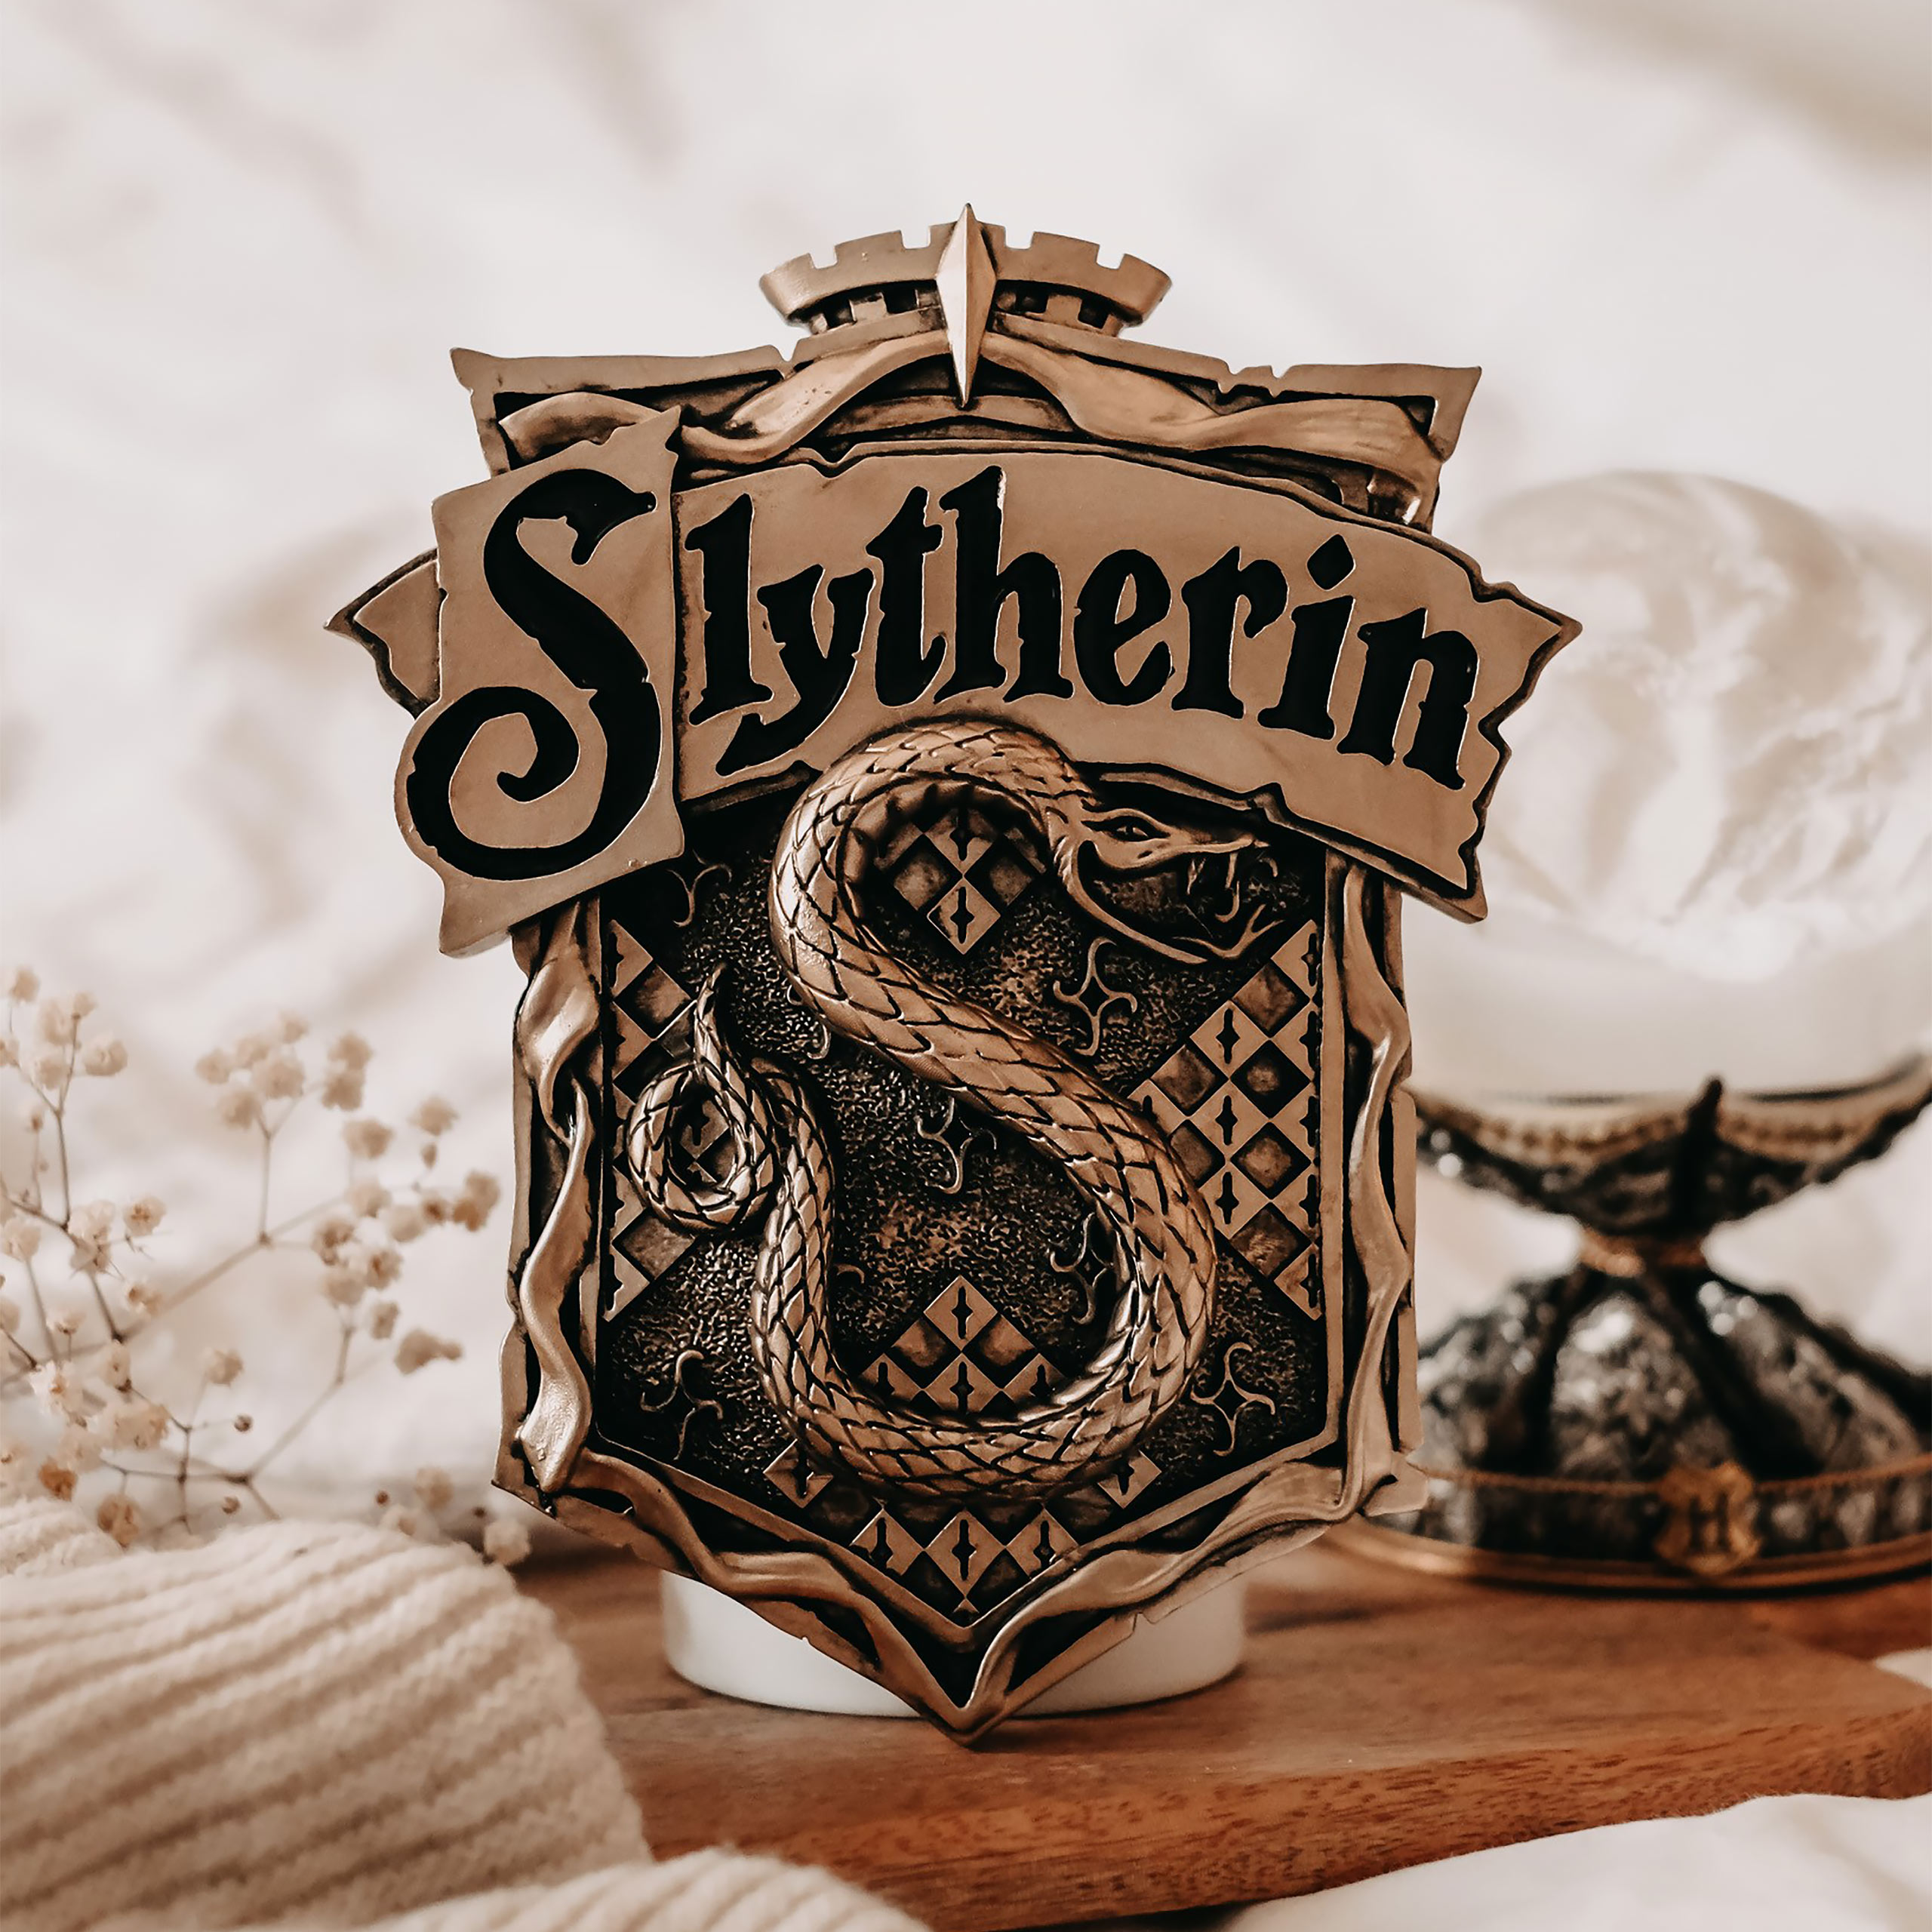 Harry Potter - Slytherin Crest Wall Picture